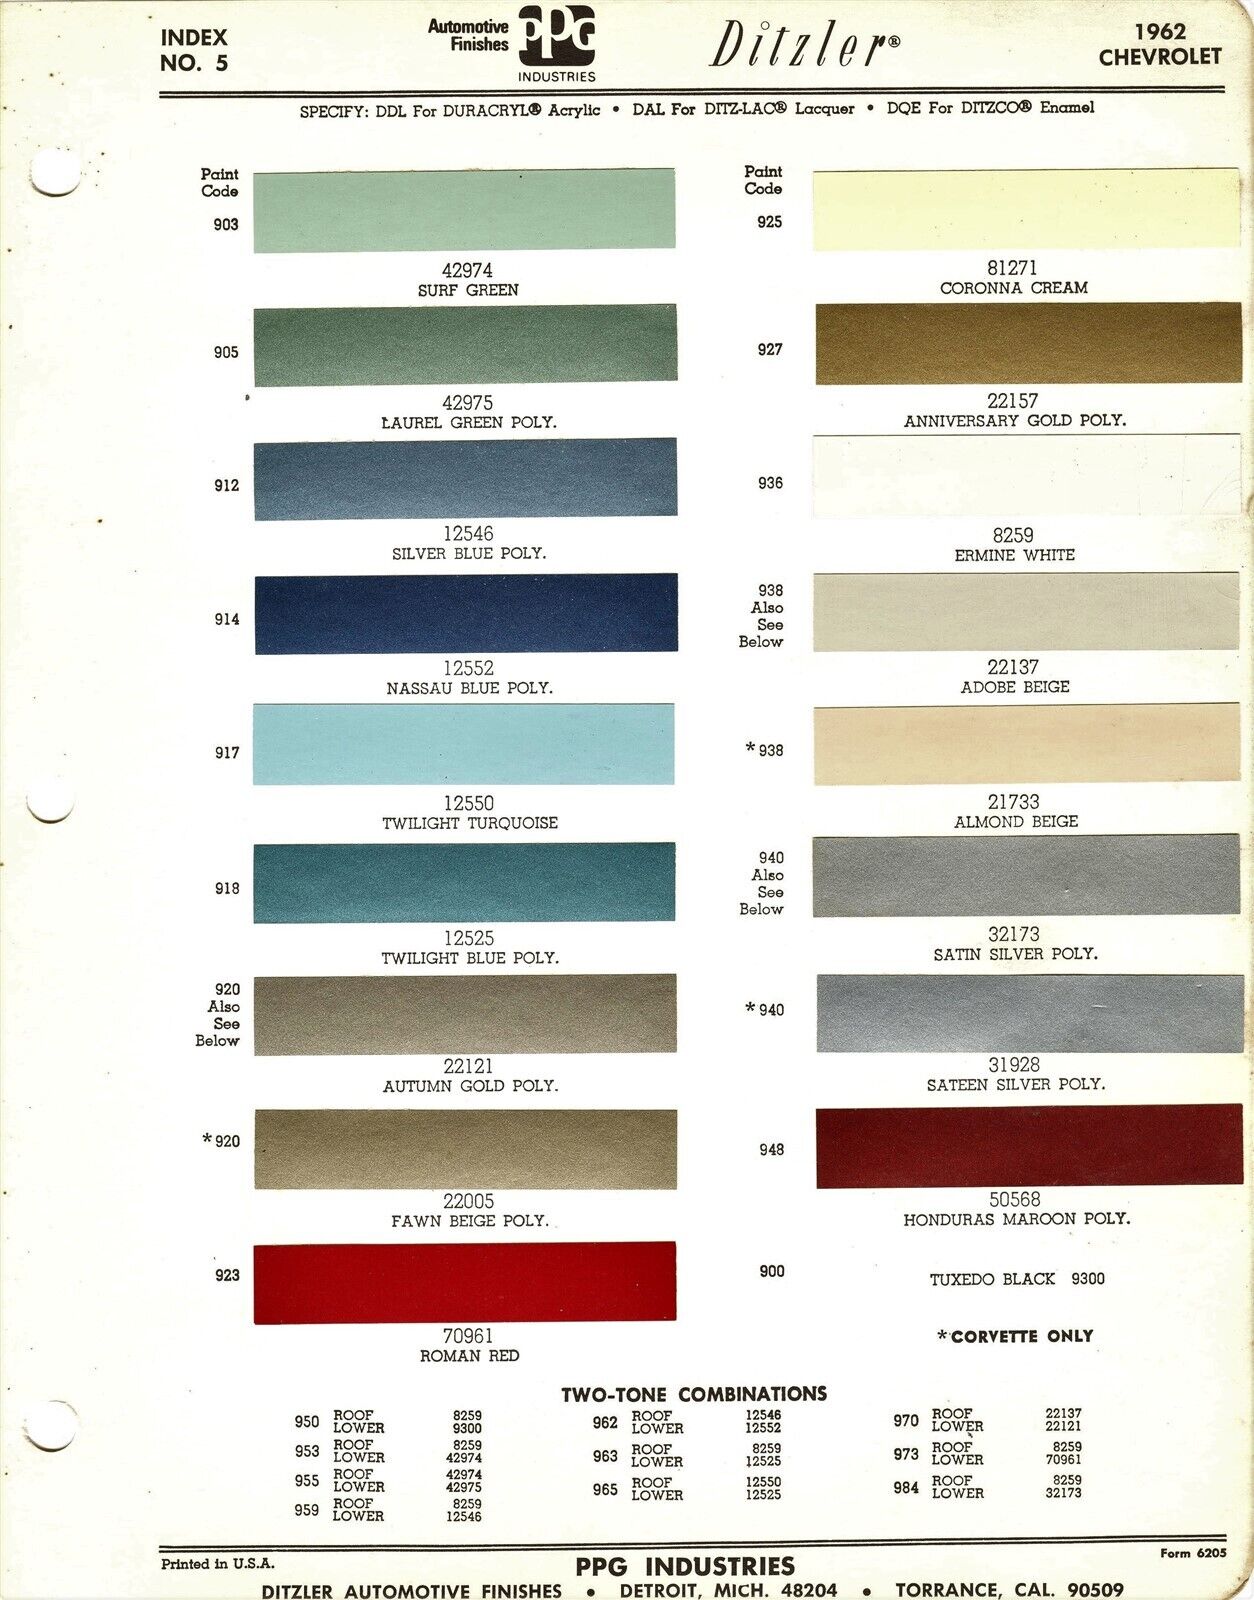 1962 CHEVROLET CORVETTE CORVAIR IMPALA SS BEL AIR CHEVY II PAINT CHIPS (PPG)